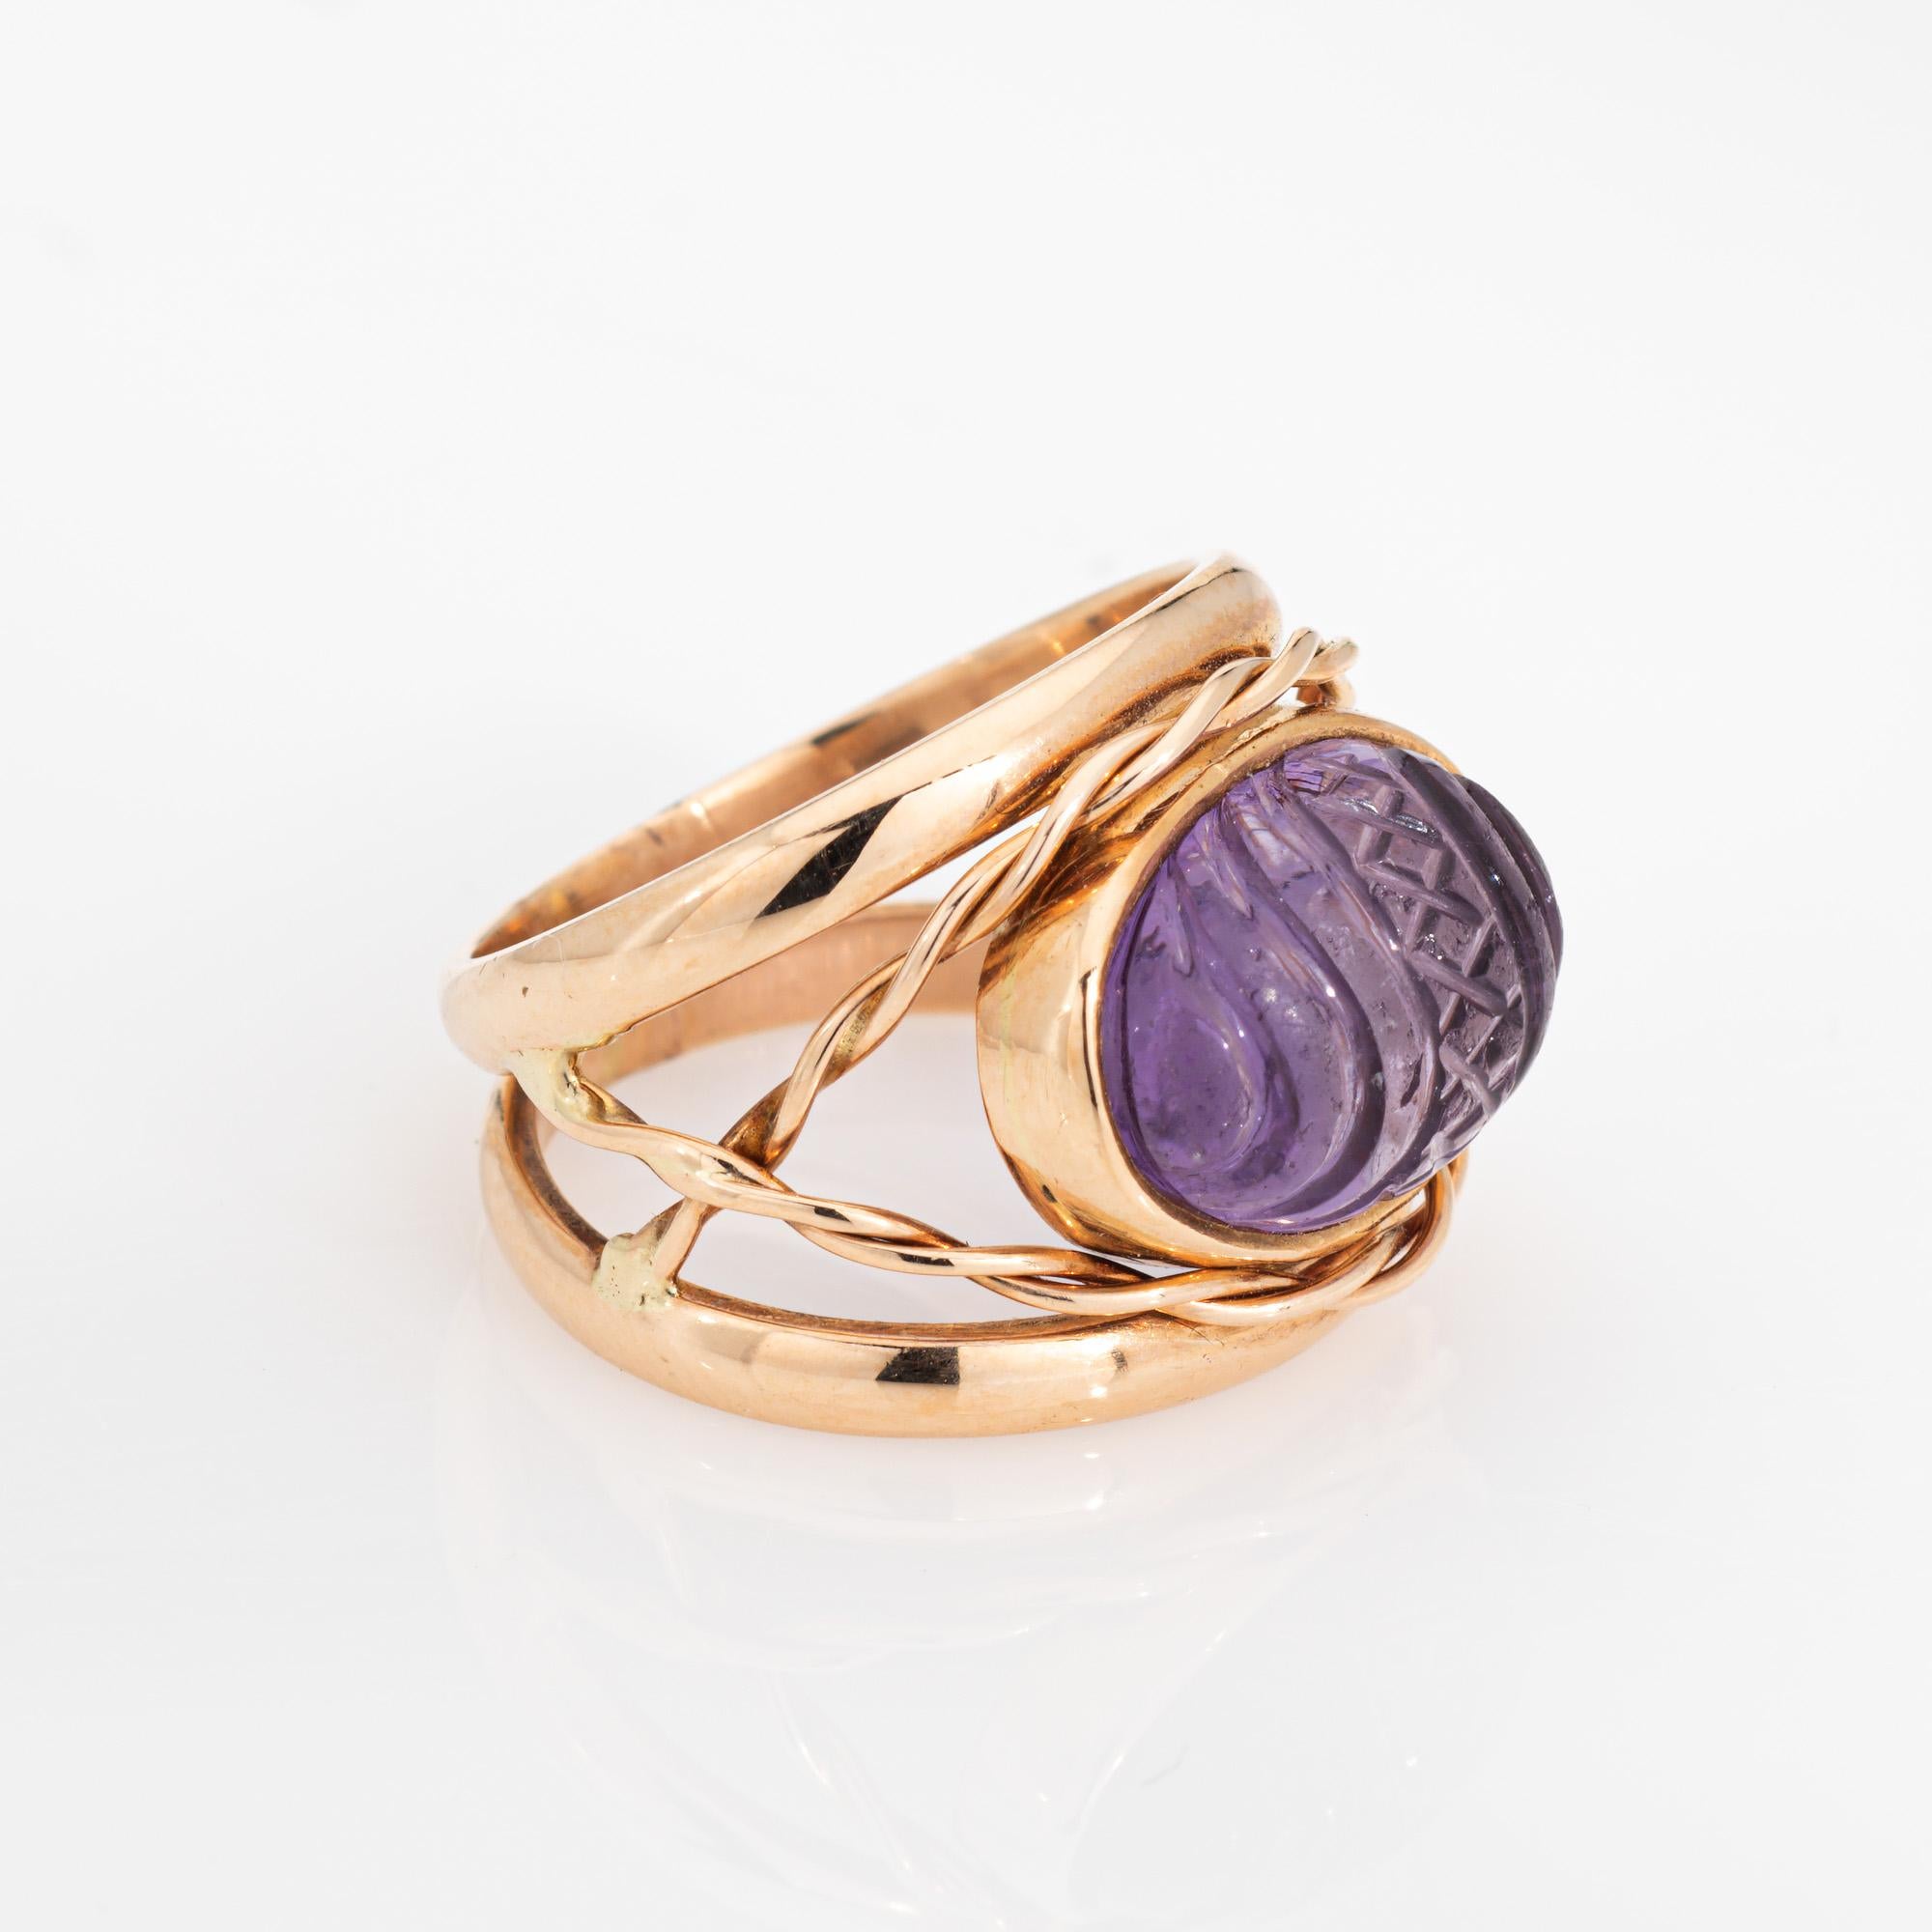 Modern Vintage Finnish Carved Amethyst Ring 14k Yellow Gold 5 Estate Finland Jewelry  For Sale